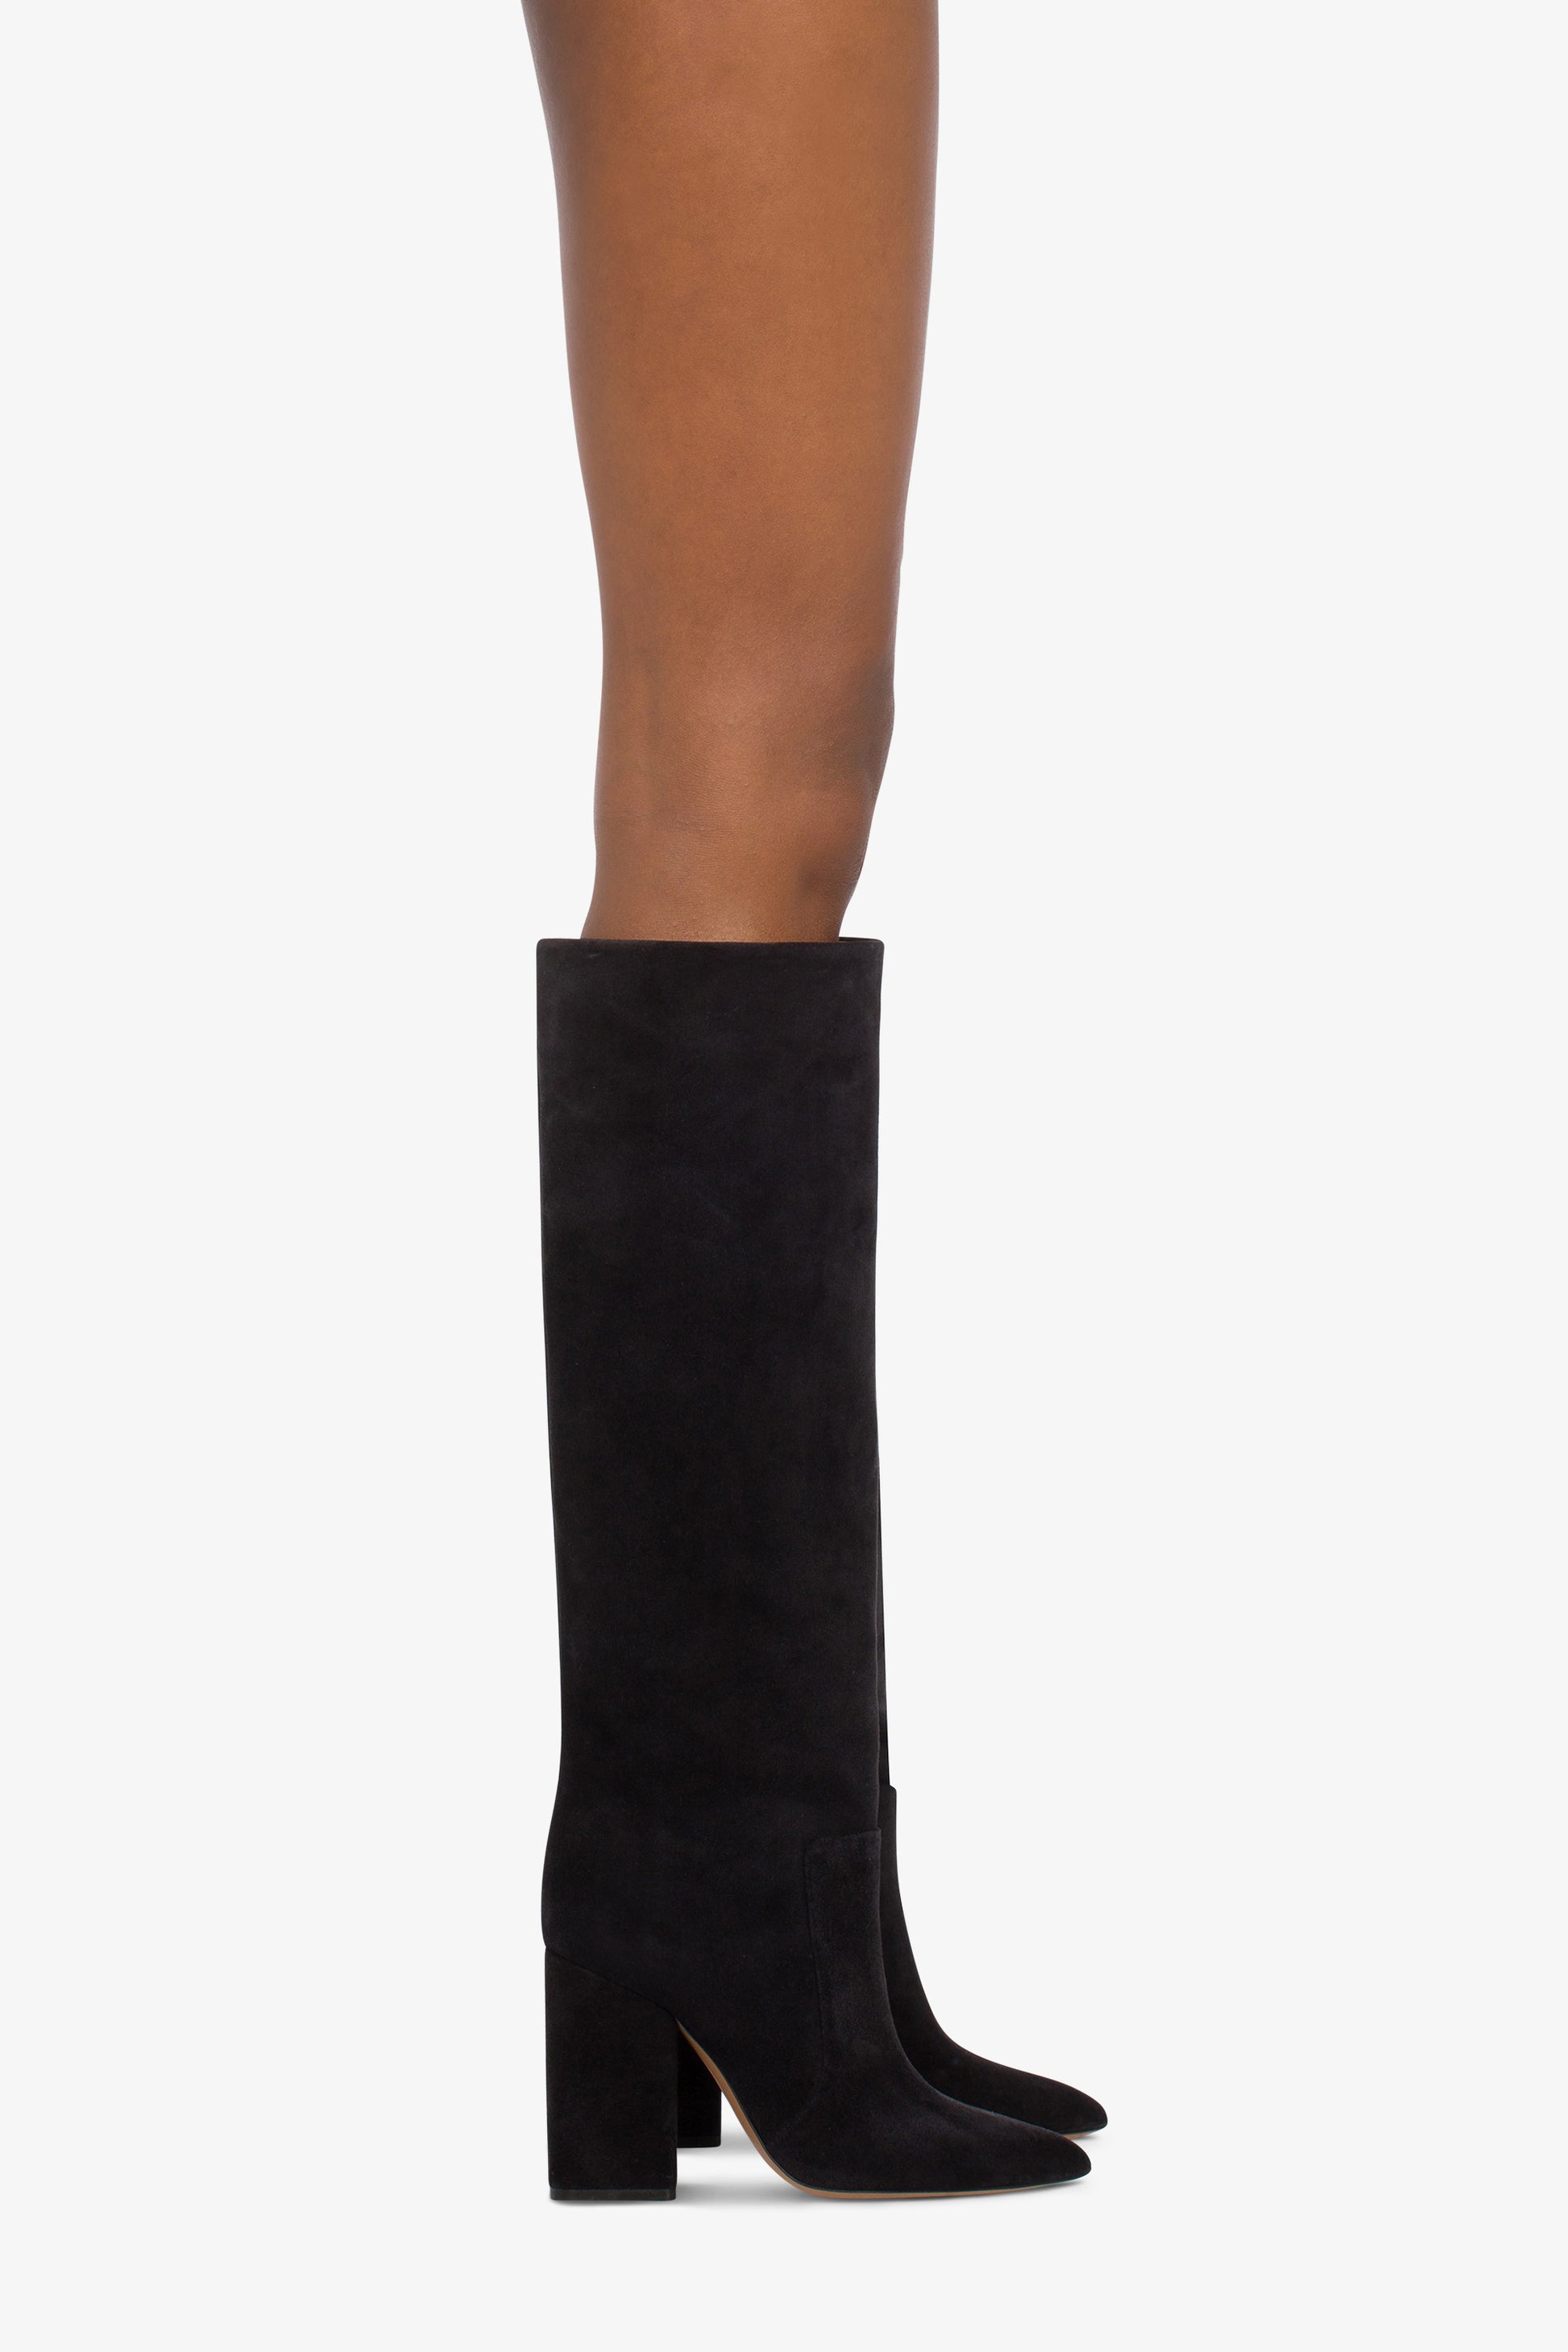 Knee-high boots in soft off-black suede leather - Producto usado